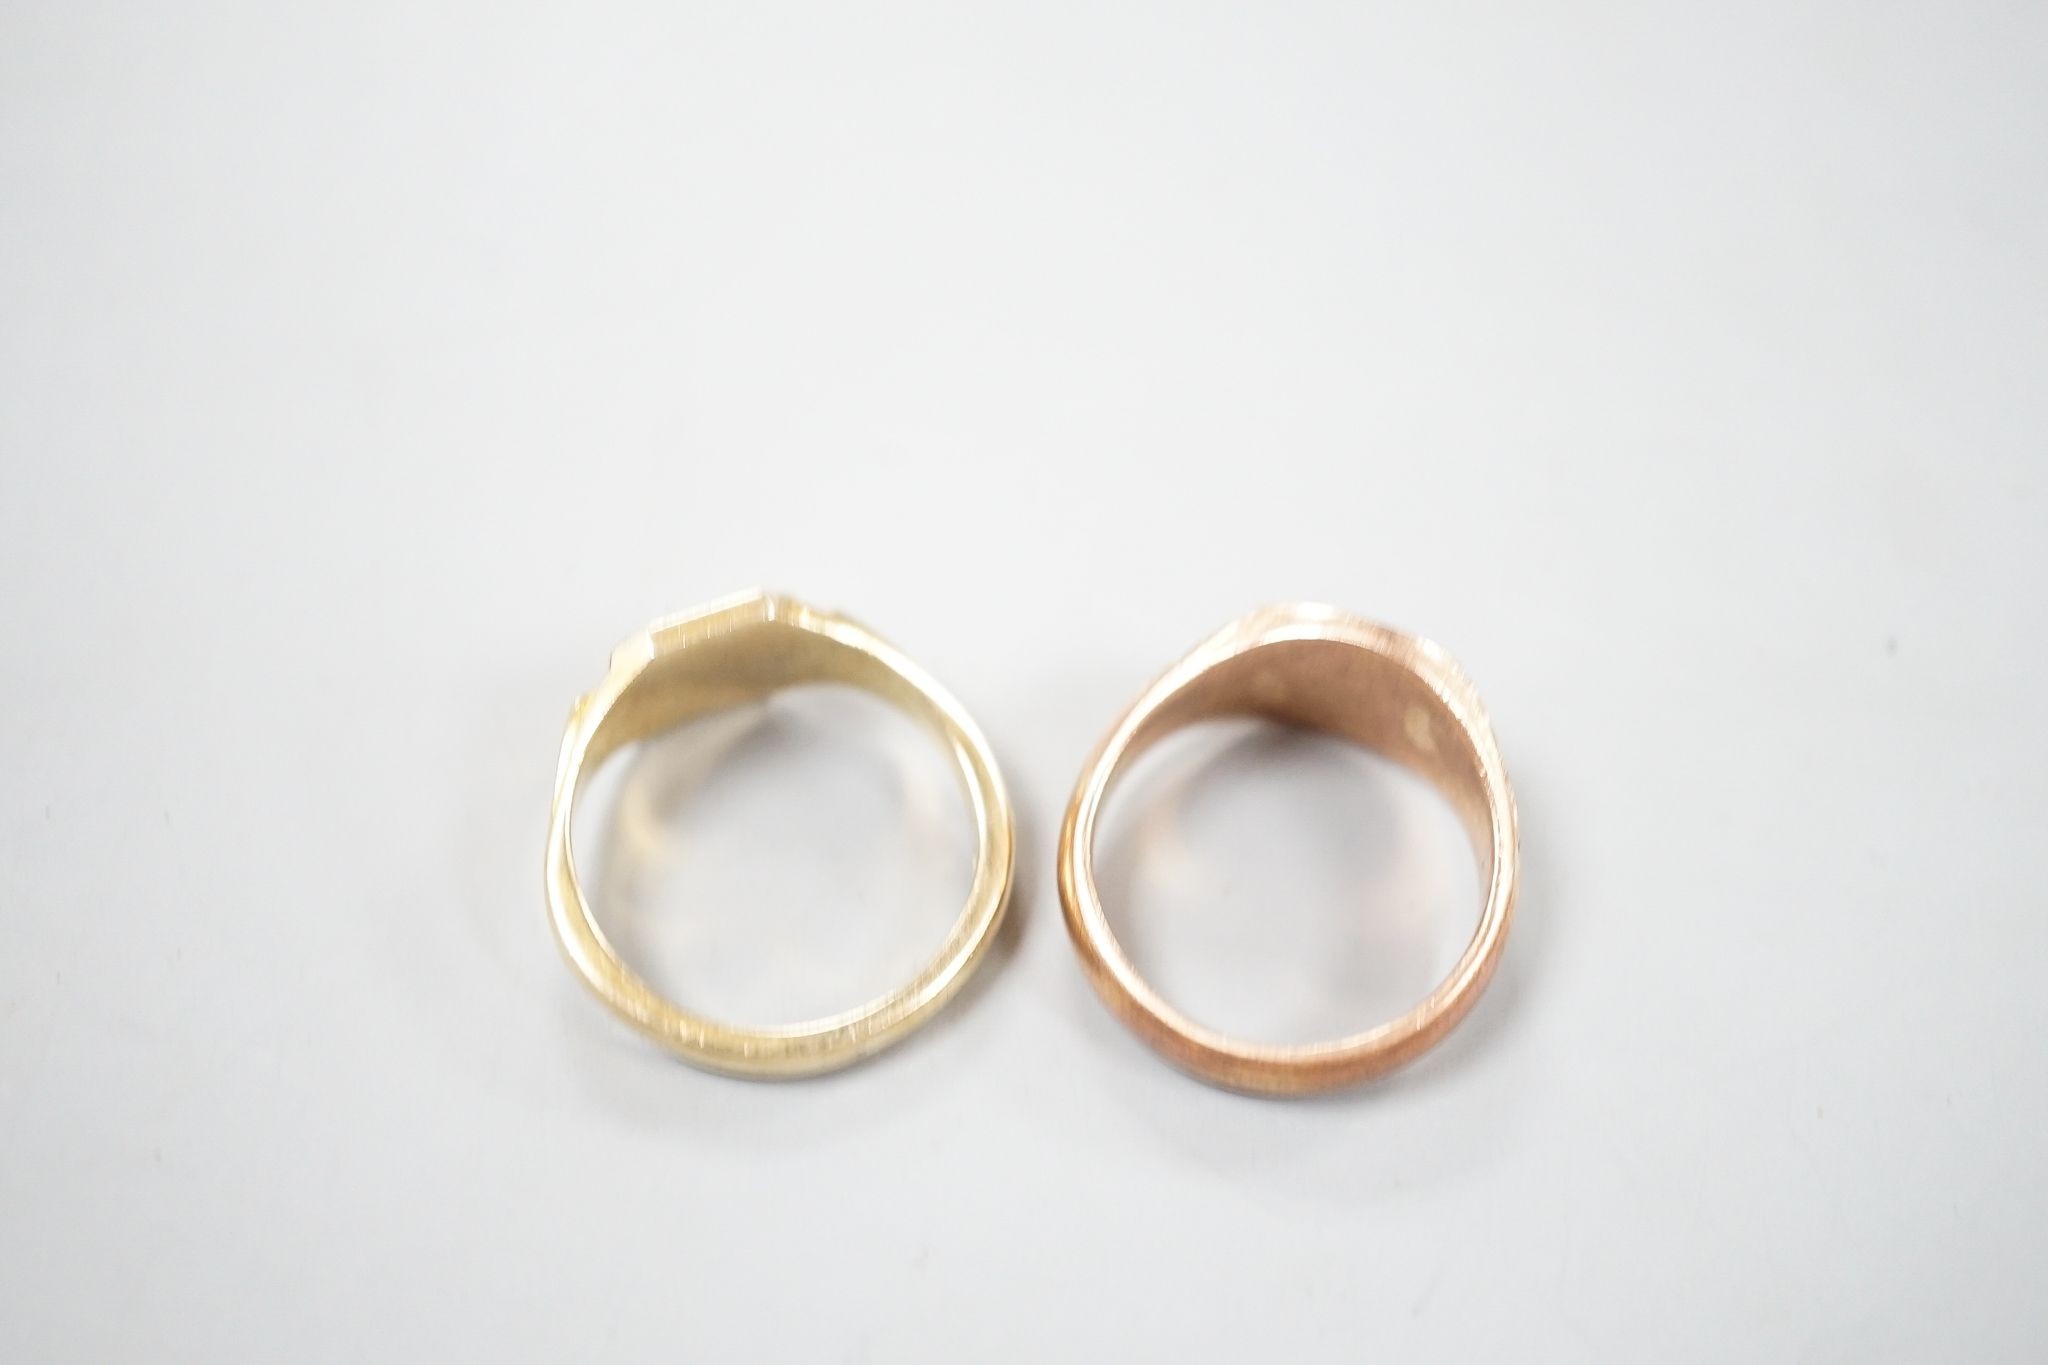 Two 9ct gold signet rings, both with engraved monograms, sizes R/S & S, gross 14.7 grams. - Image 8 of 9